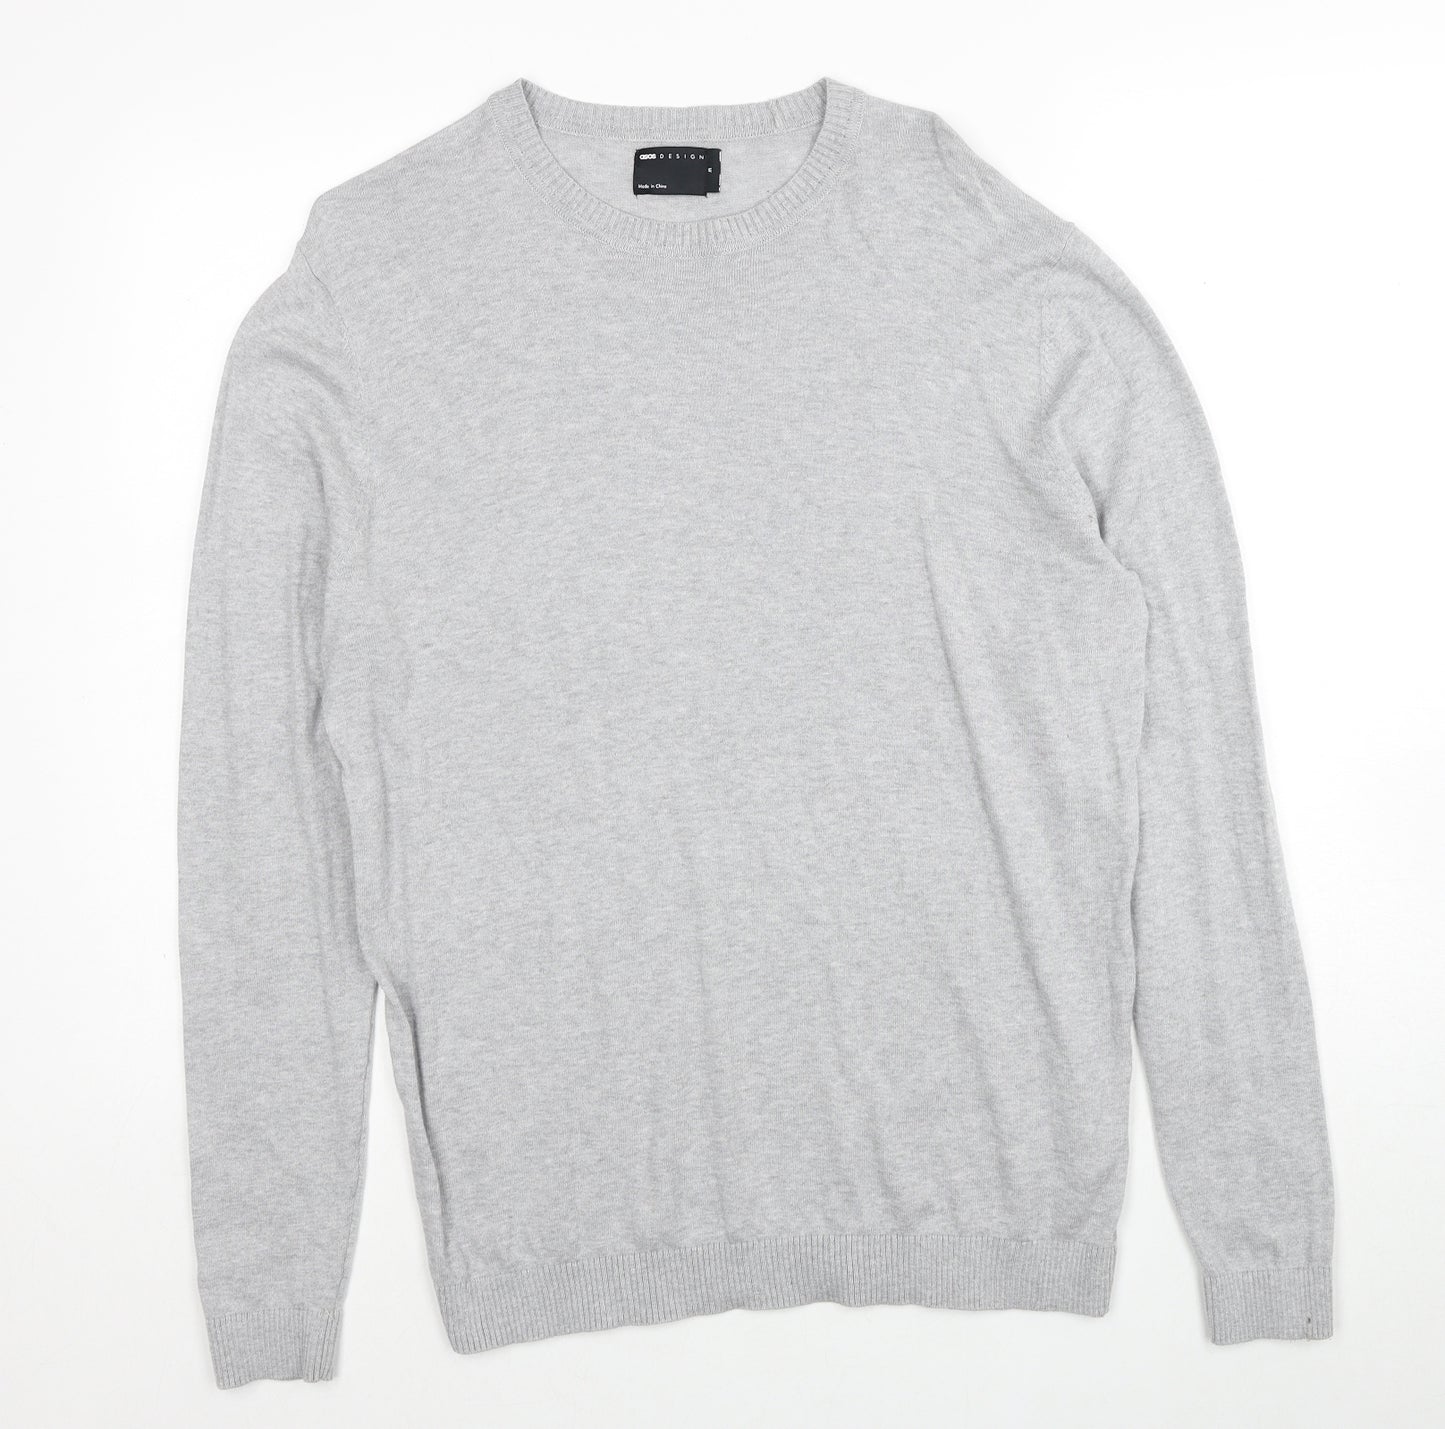 ASOS Mens Grey Round Neck Cotton Pullover Jumper Size M Long Sleeve